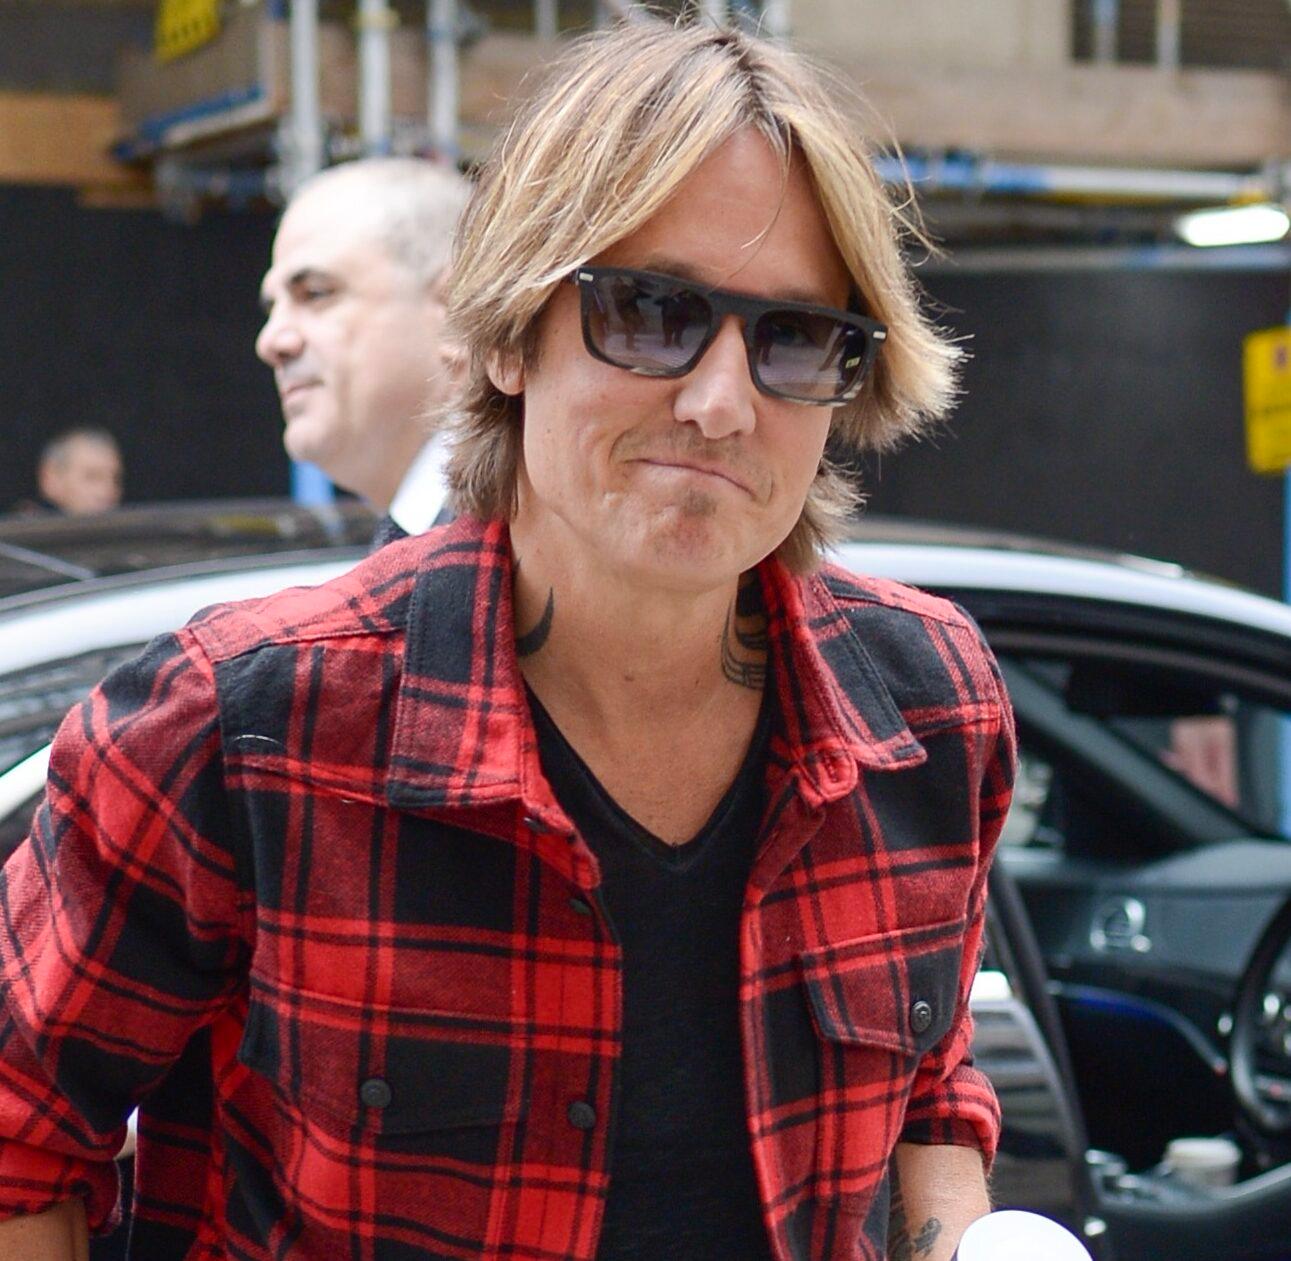 Keith Urban pictured at BBC Radio 2 in London England on October 15th 2019